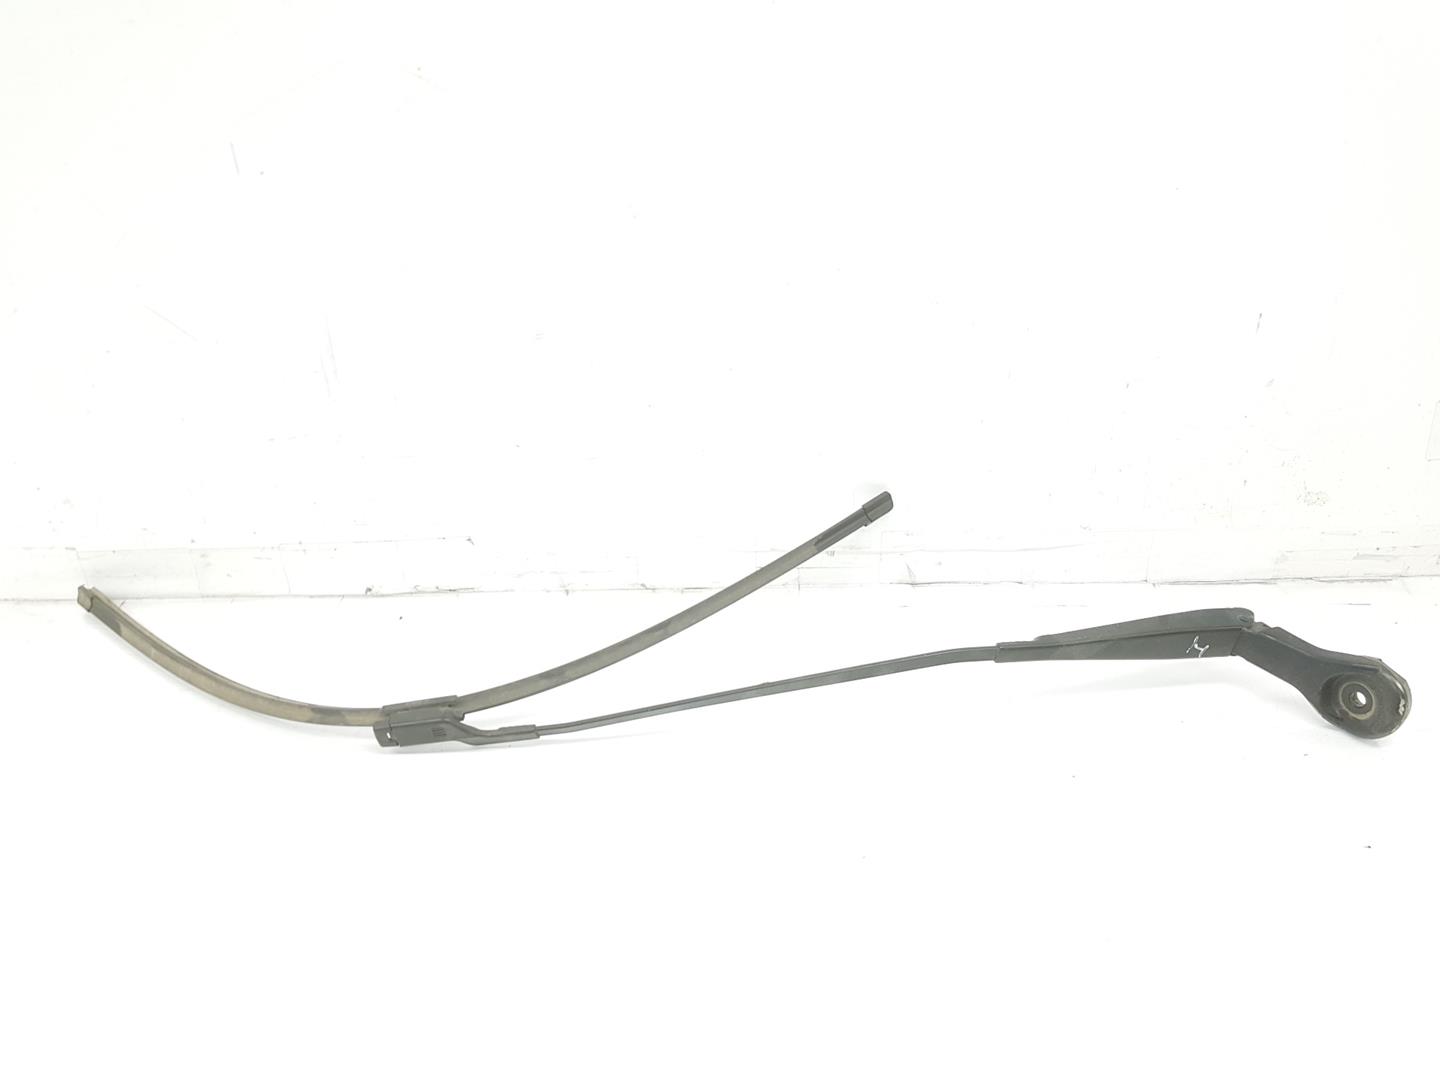 CITROËN C4 Picasso 2 generation (2013-2018) Front Wiper Arms 1609428680, 9837605180 24193833